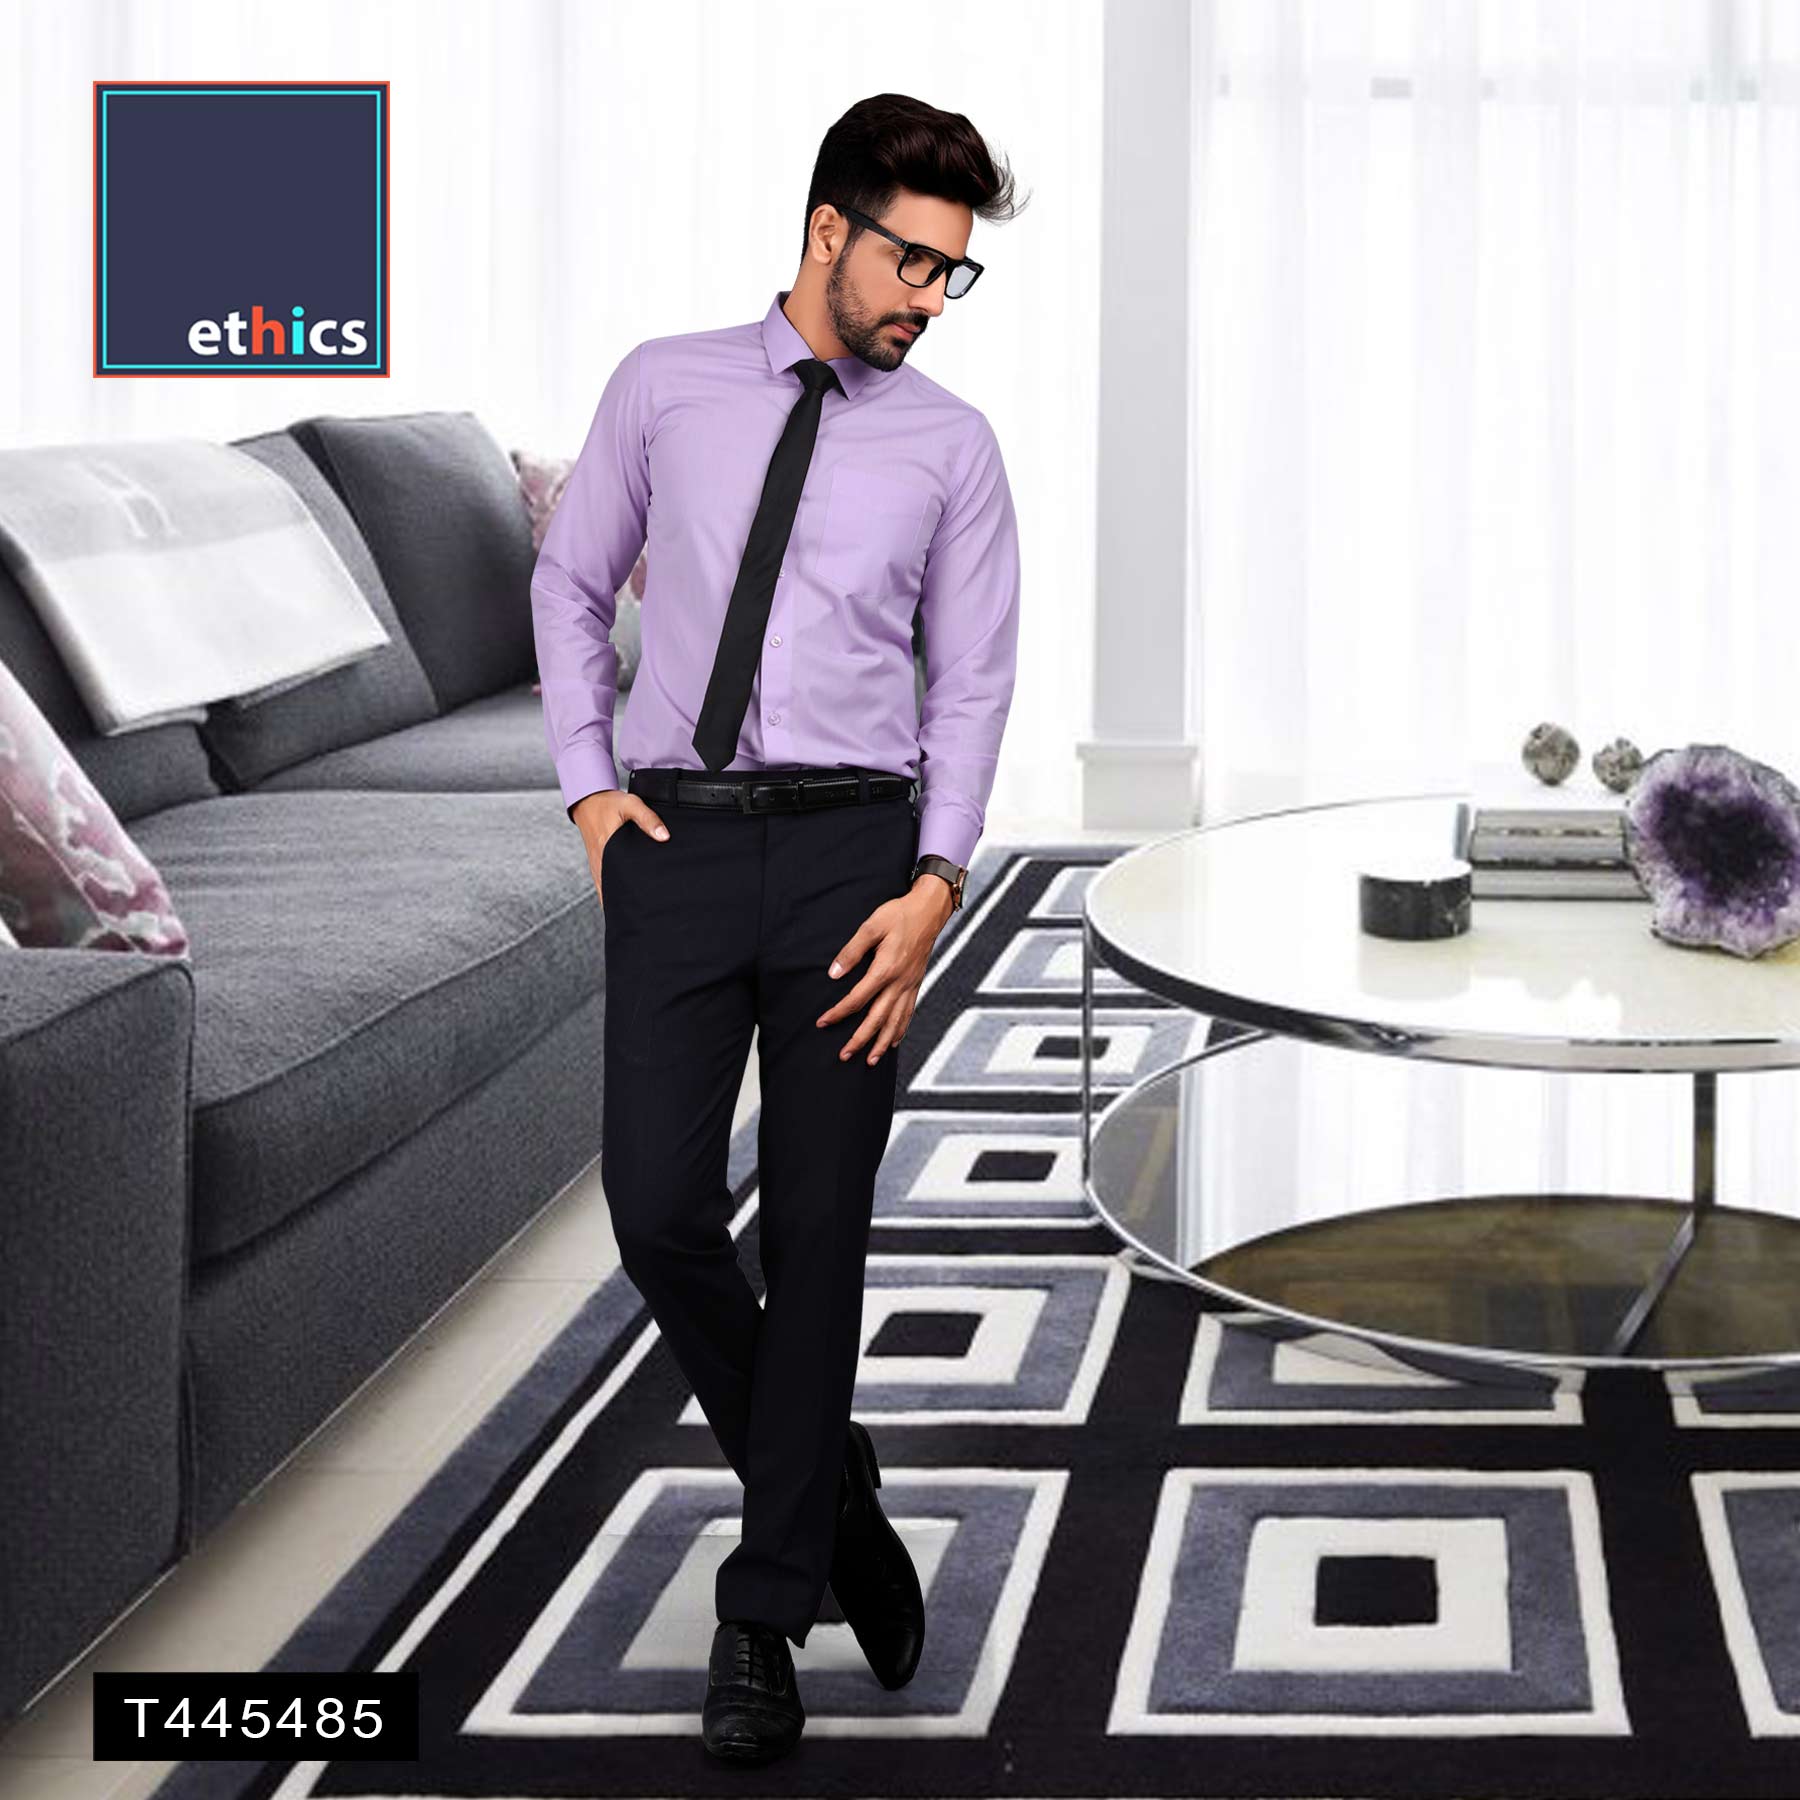 Buy The Black Formal and casual Pant online for men  Beyours